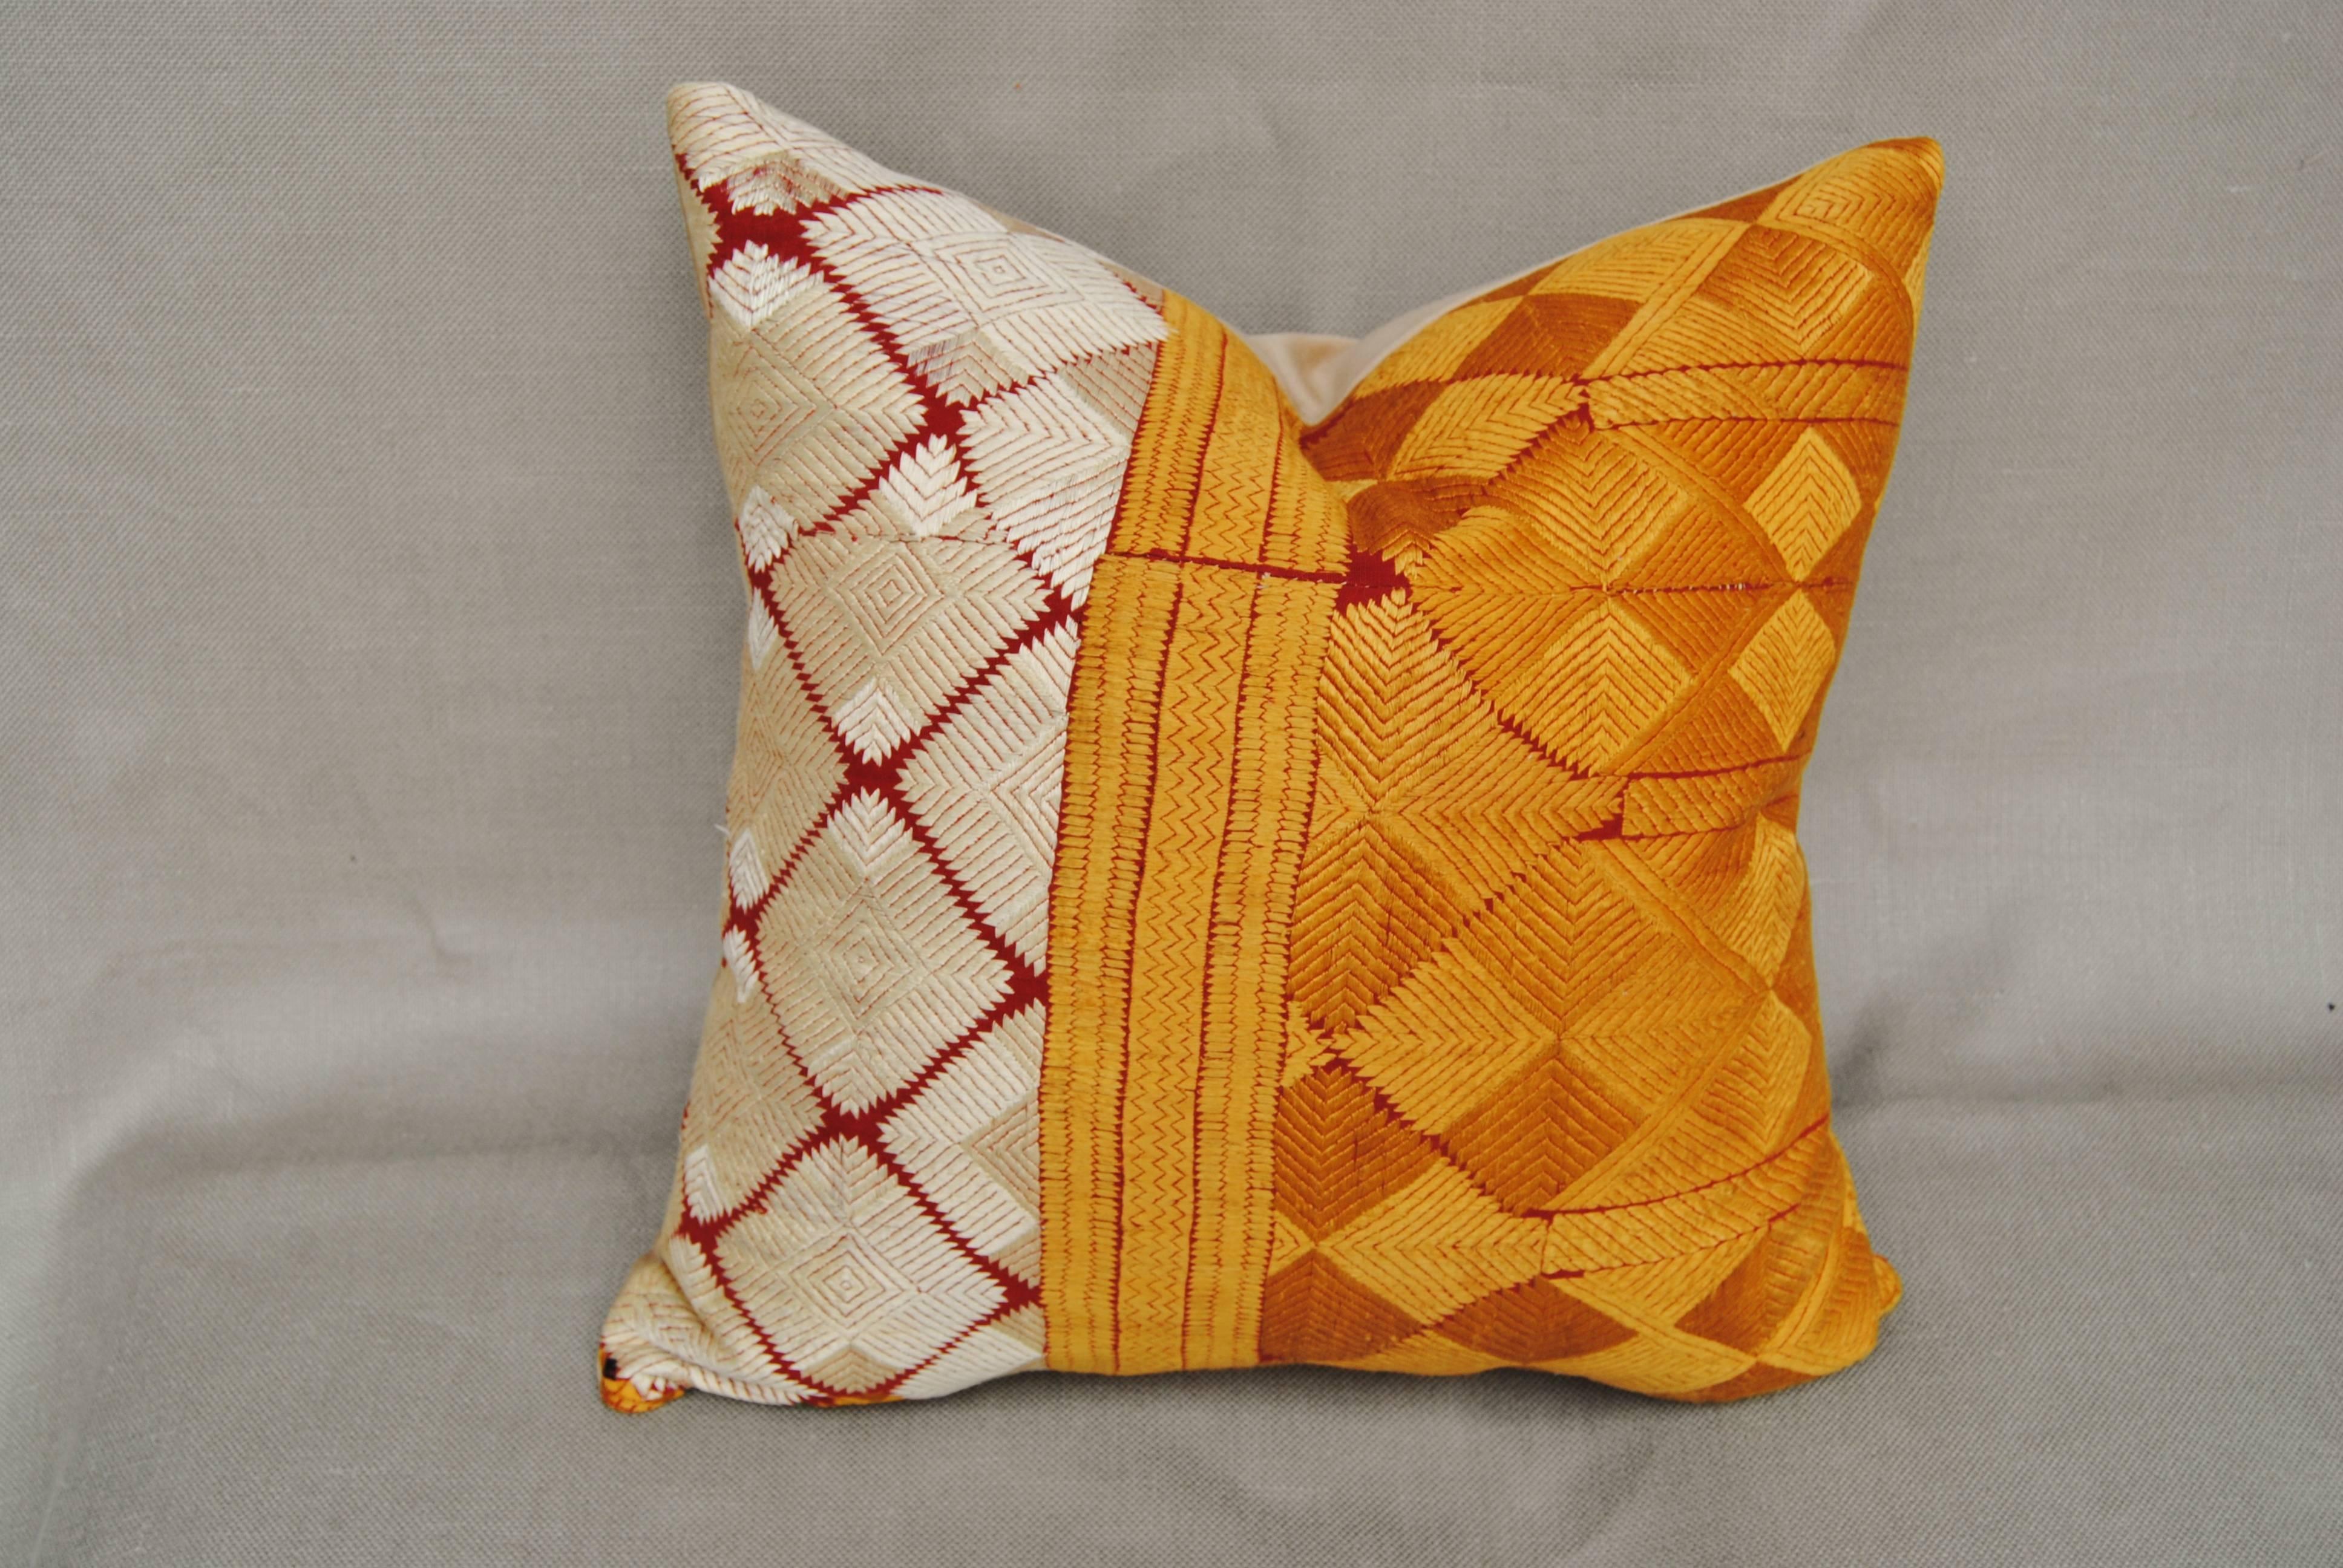 Custom pillow cut from a vintage hand embroidered Phulkari Bagh wedding shawl from Punjab, India. The very rare 